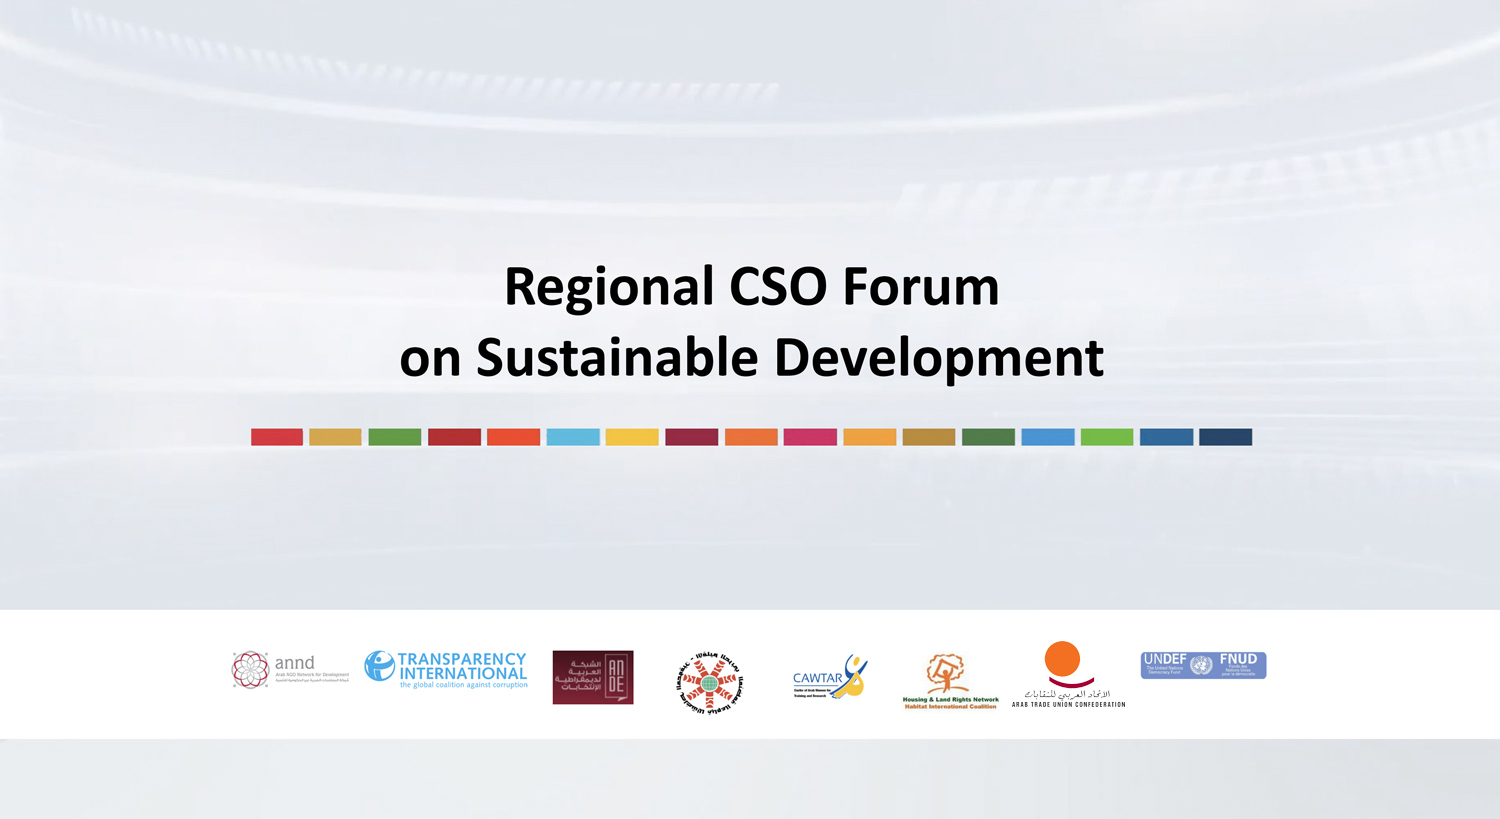 Regional Meeting for CSOs on Sustainable Development 13-14 March 2022 - Beirut